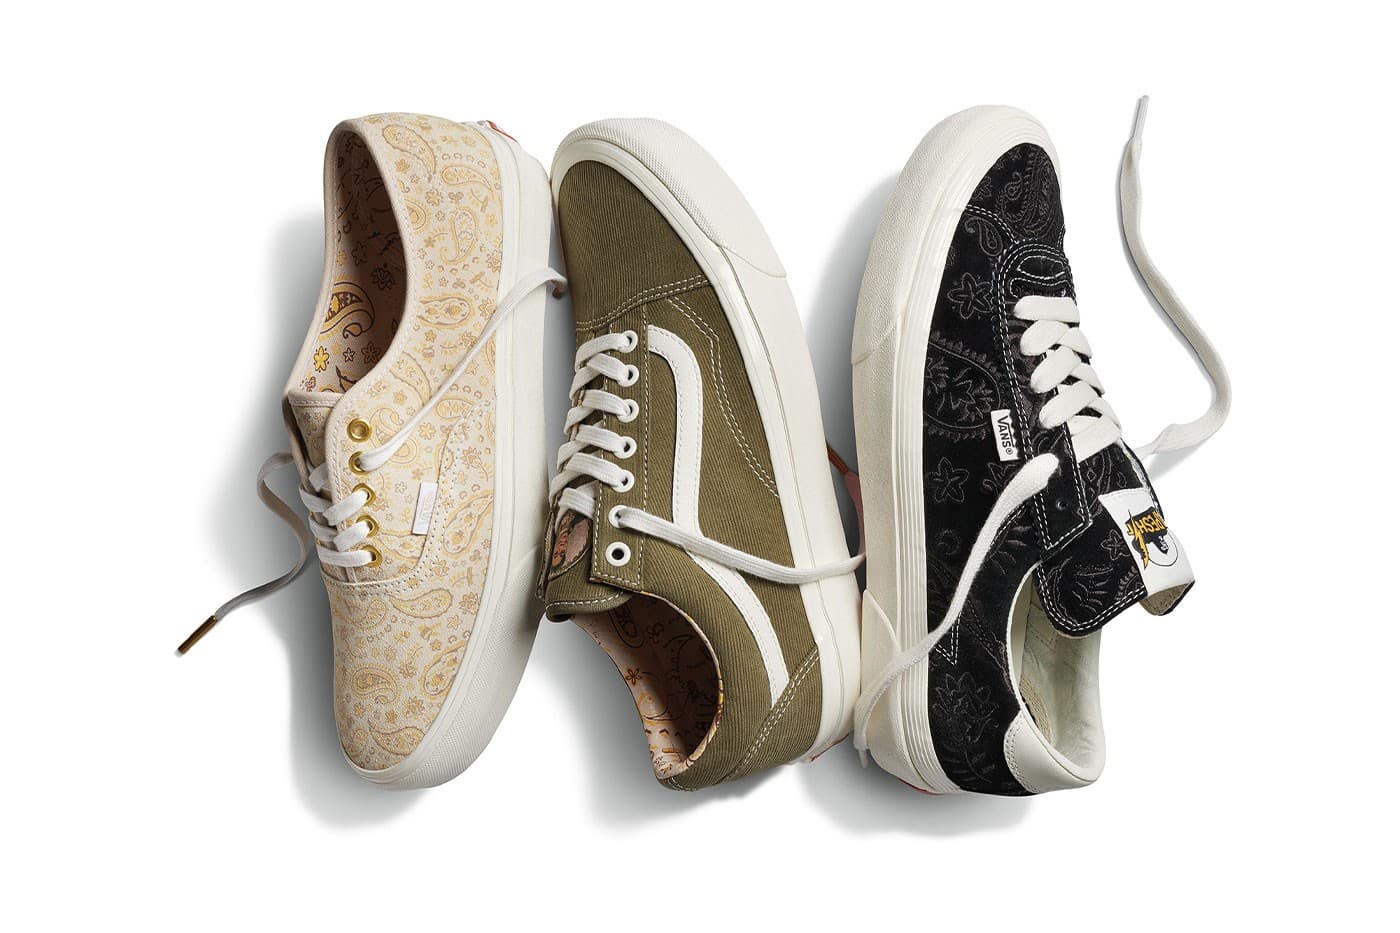 vans-anderson-paak-collab-collection-release-info-002.jpg